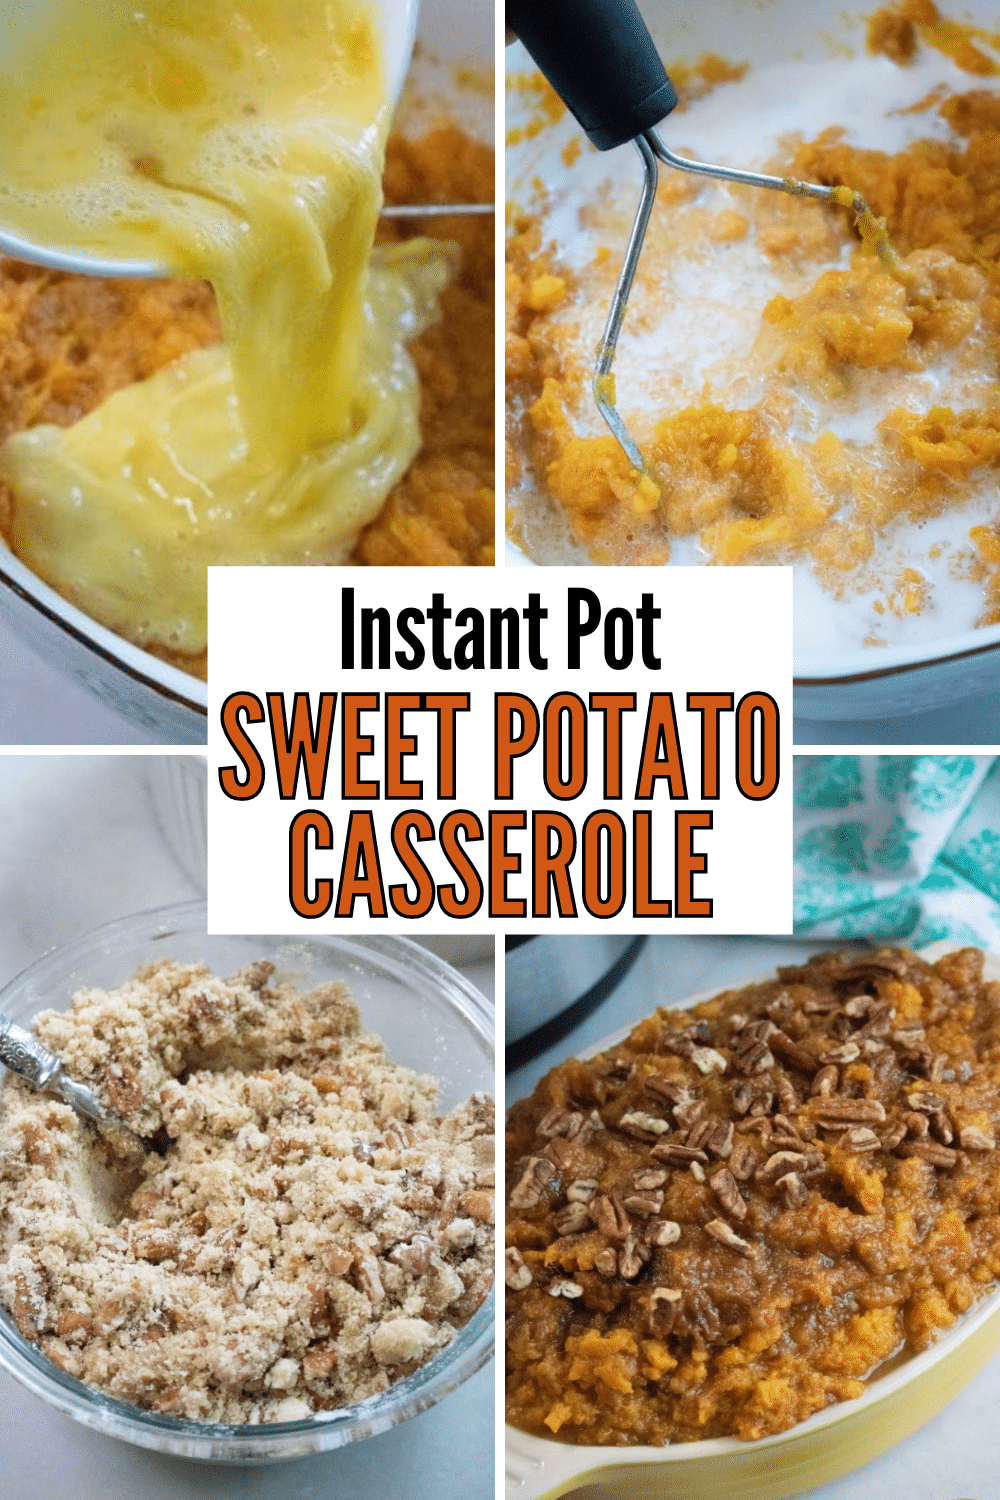 This Instant Pot Sweet Potato Casserole is really simple and so delicious! Best side dish ever! #sweetpotato #Thanksgiving #instantpot via @wondermomwannab